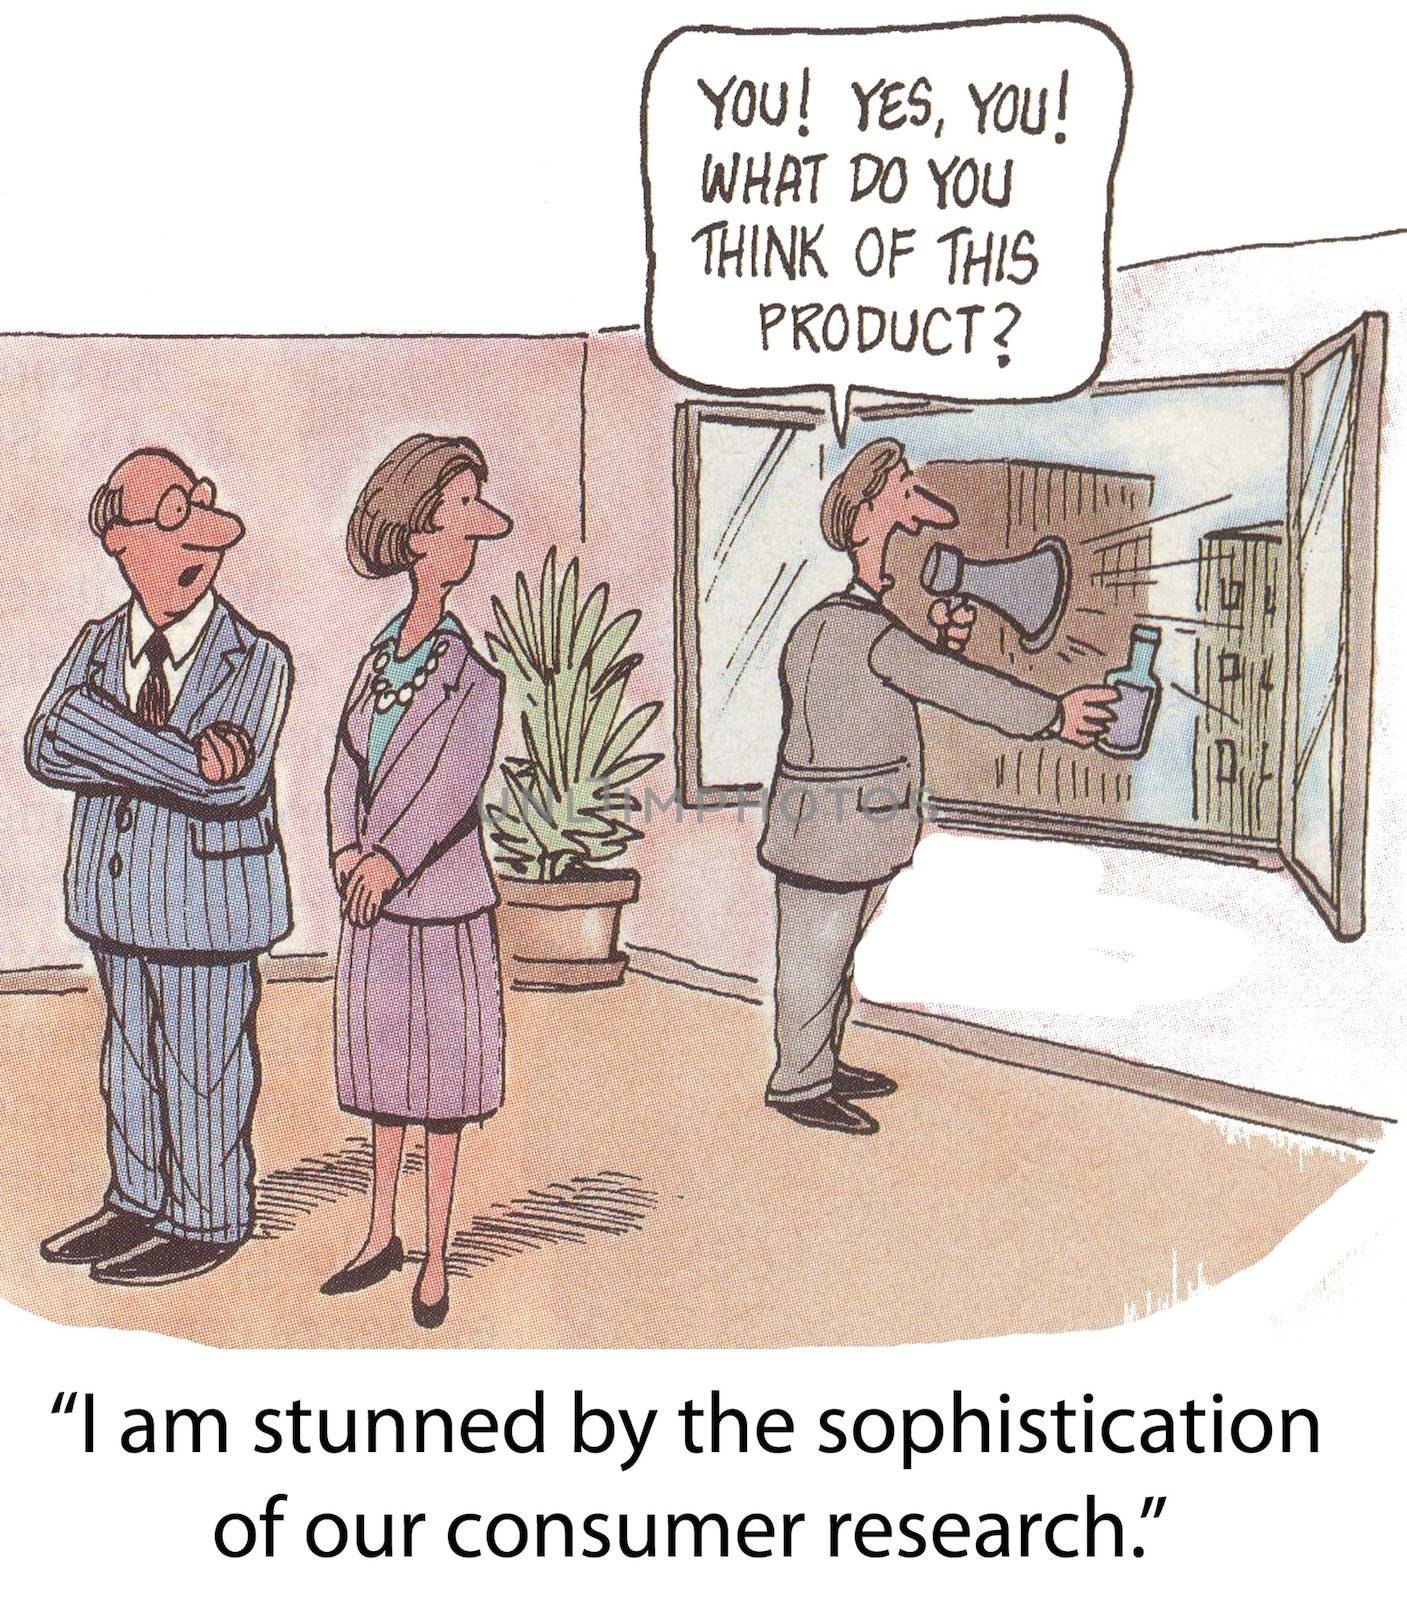 "I am stunned by the sophistication of our consumer research."  ('You!  Yes, you!  What do you think of this product?')